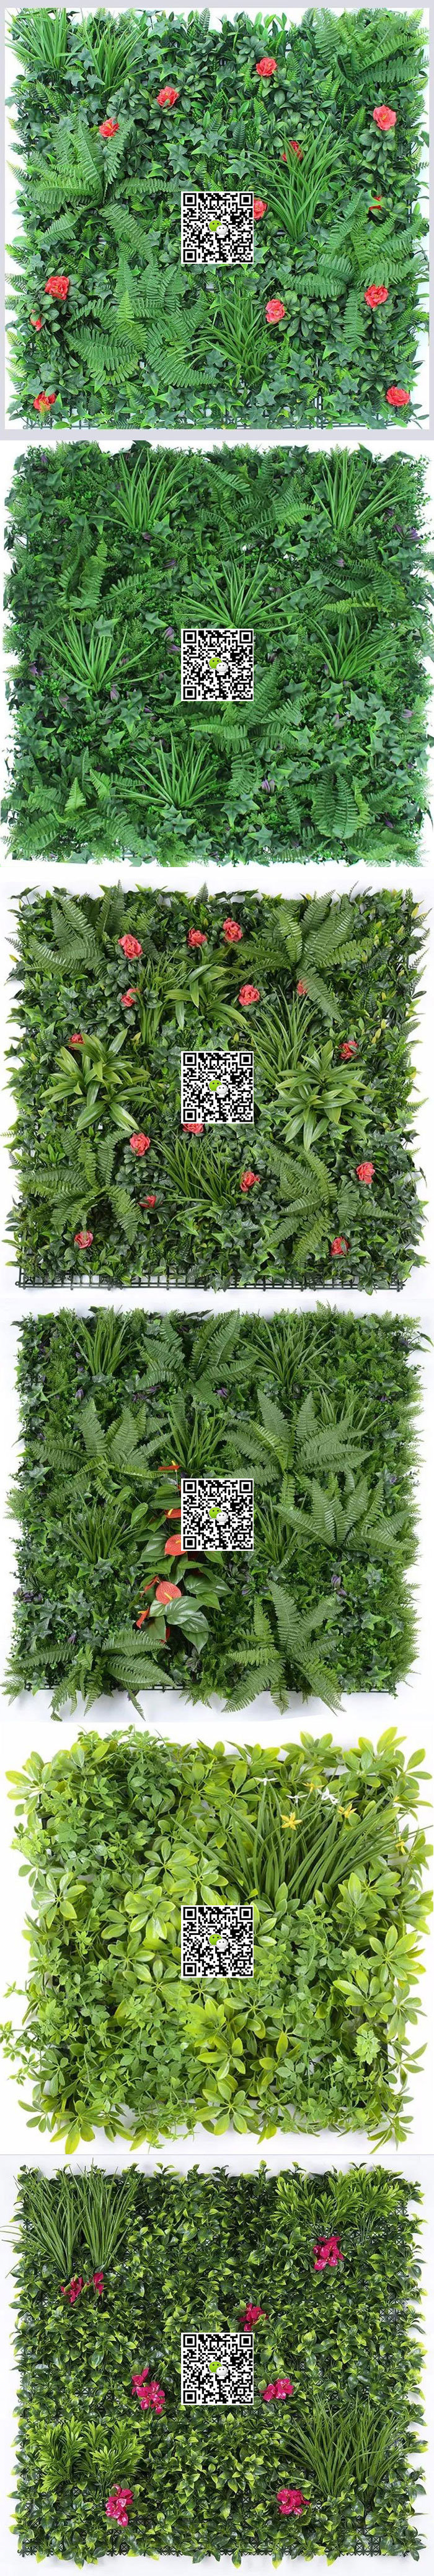 Plastic Artificial Green Plant Foliage Leaf Hedge Privacy Garden Fence Vertical Wall